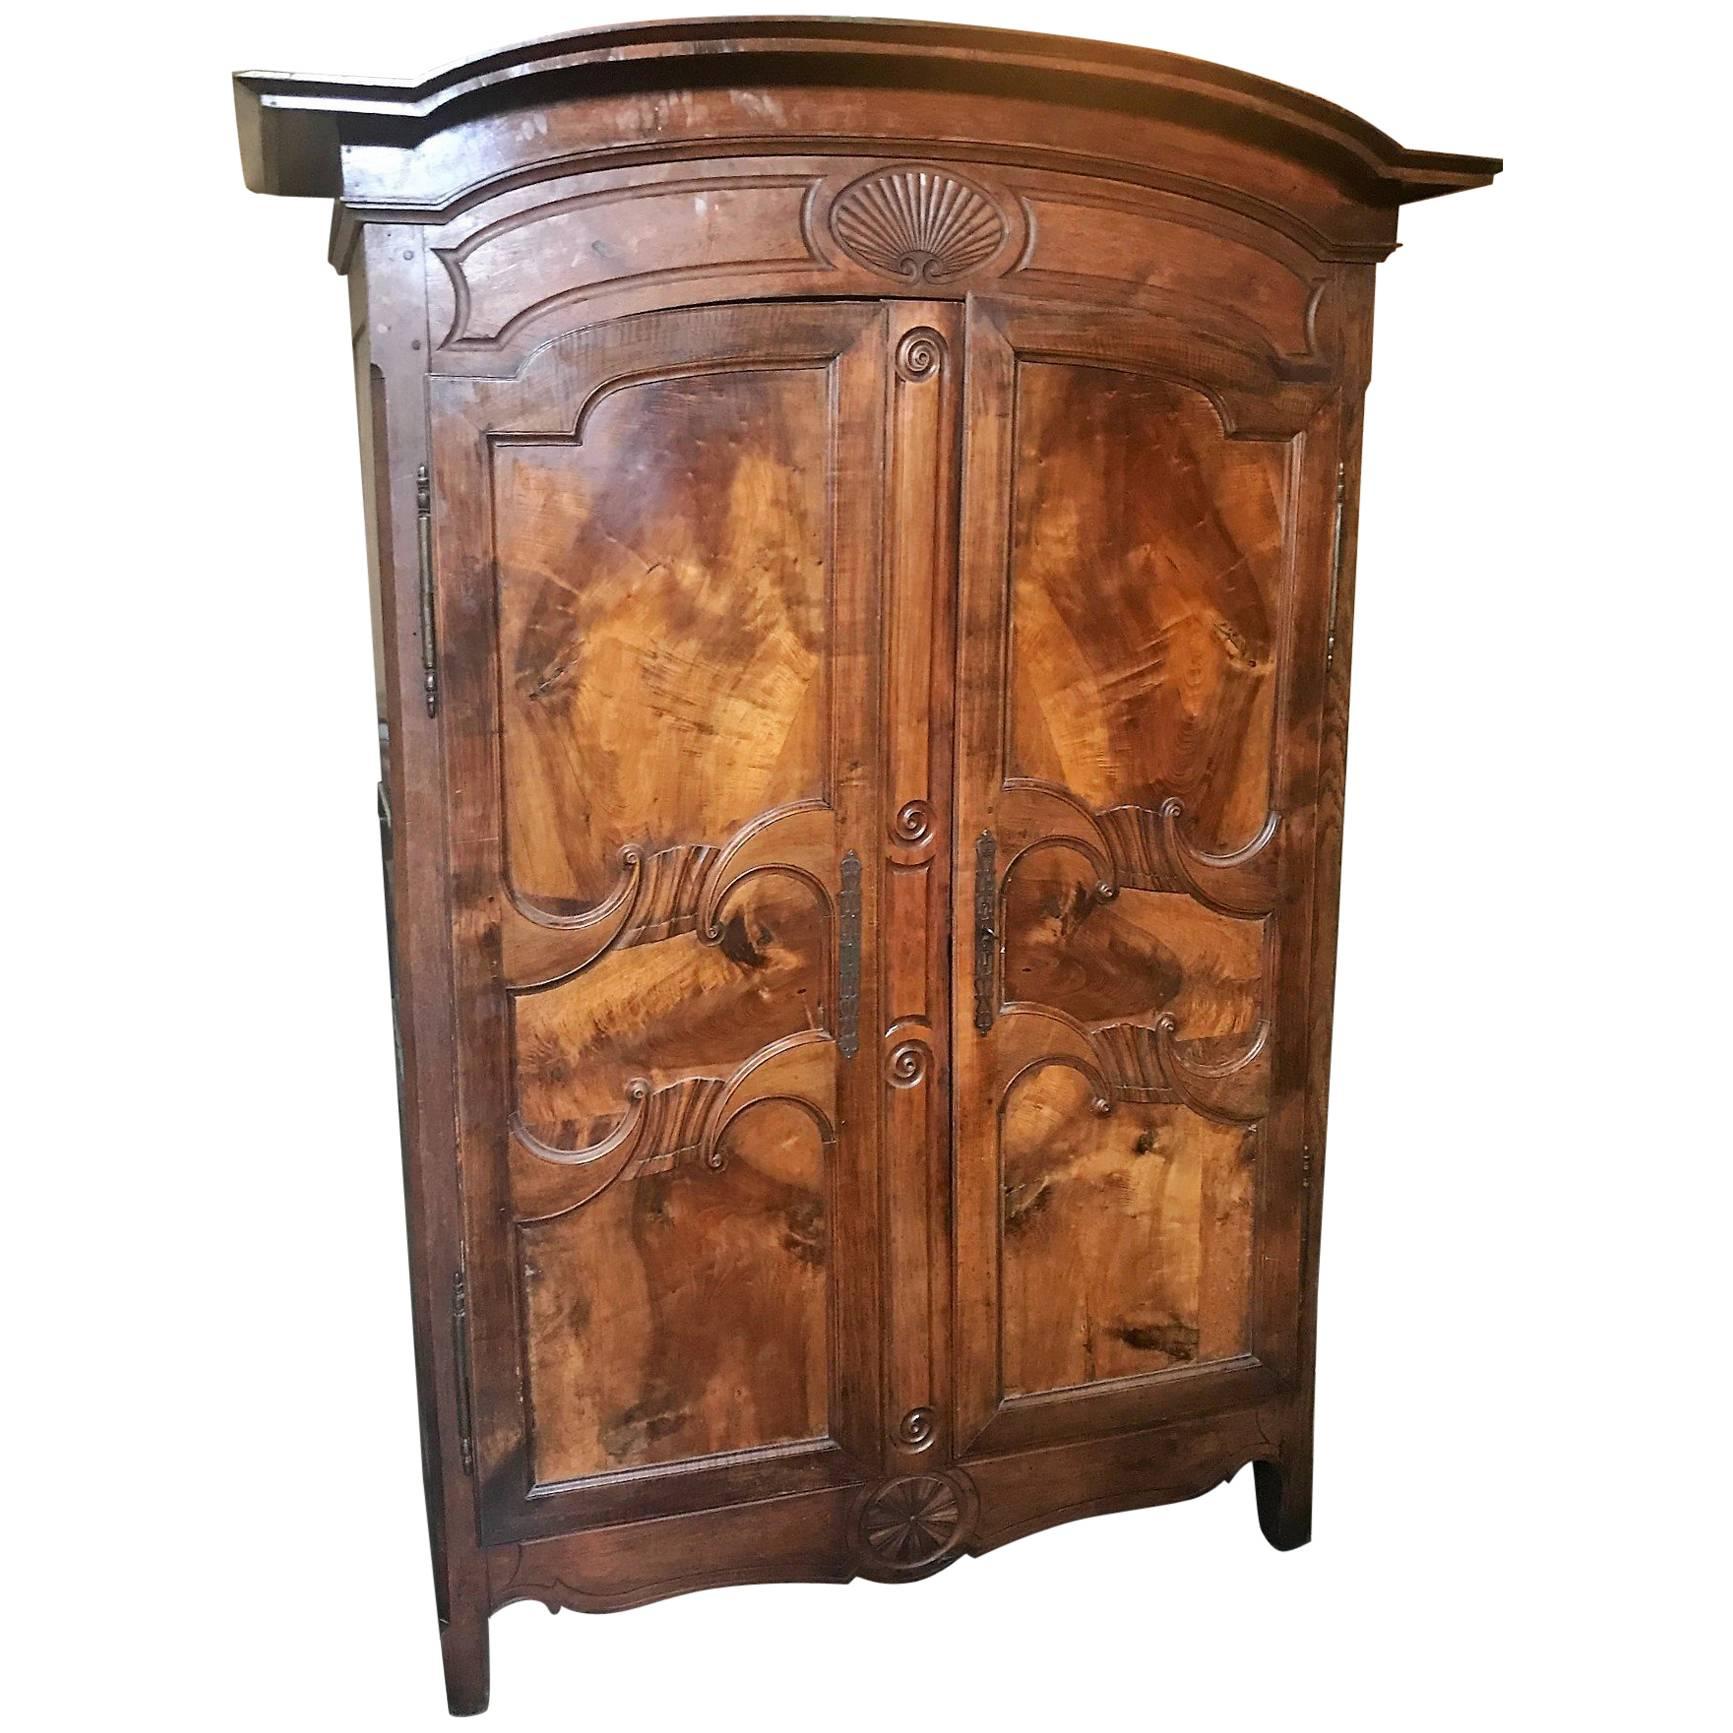 Early 19th Century, French Provincial Walnut and Cherry Armoire